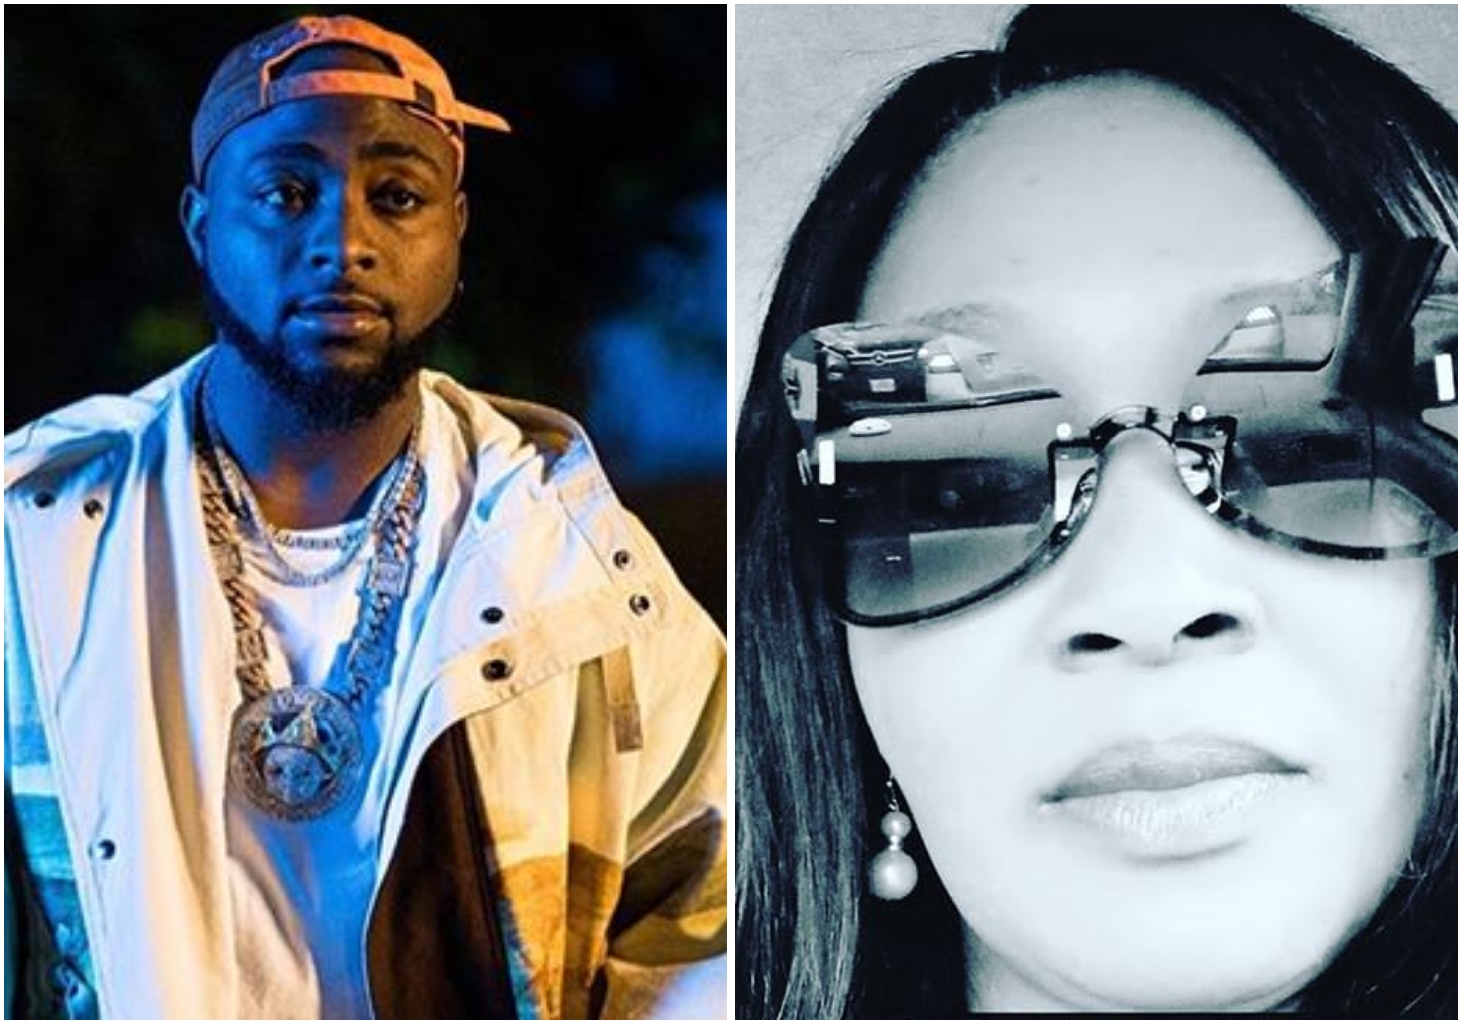 Davido has tested positive for Covid-19 but scared to open up – Kemi Olunloyo